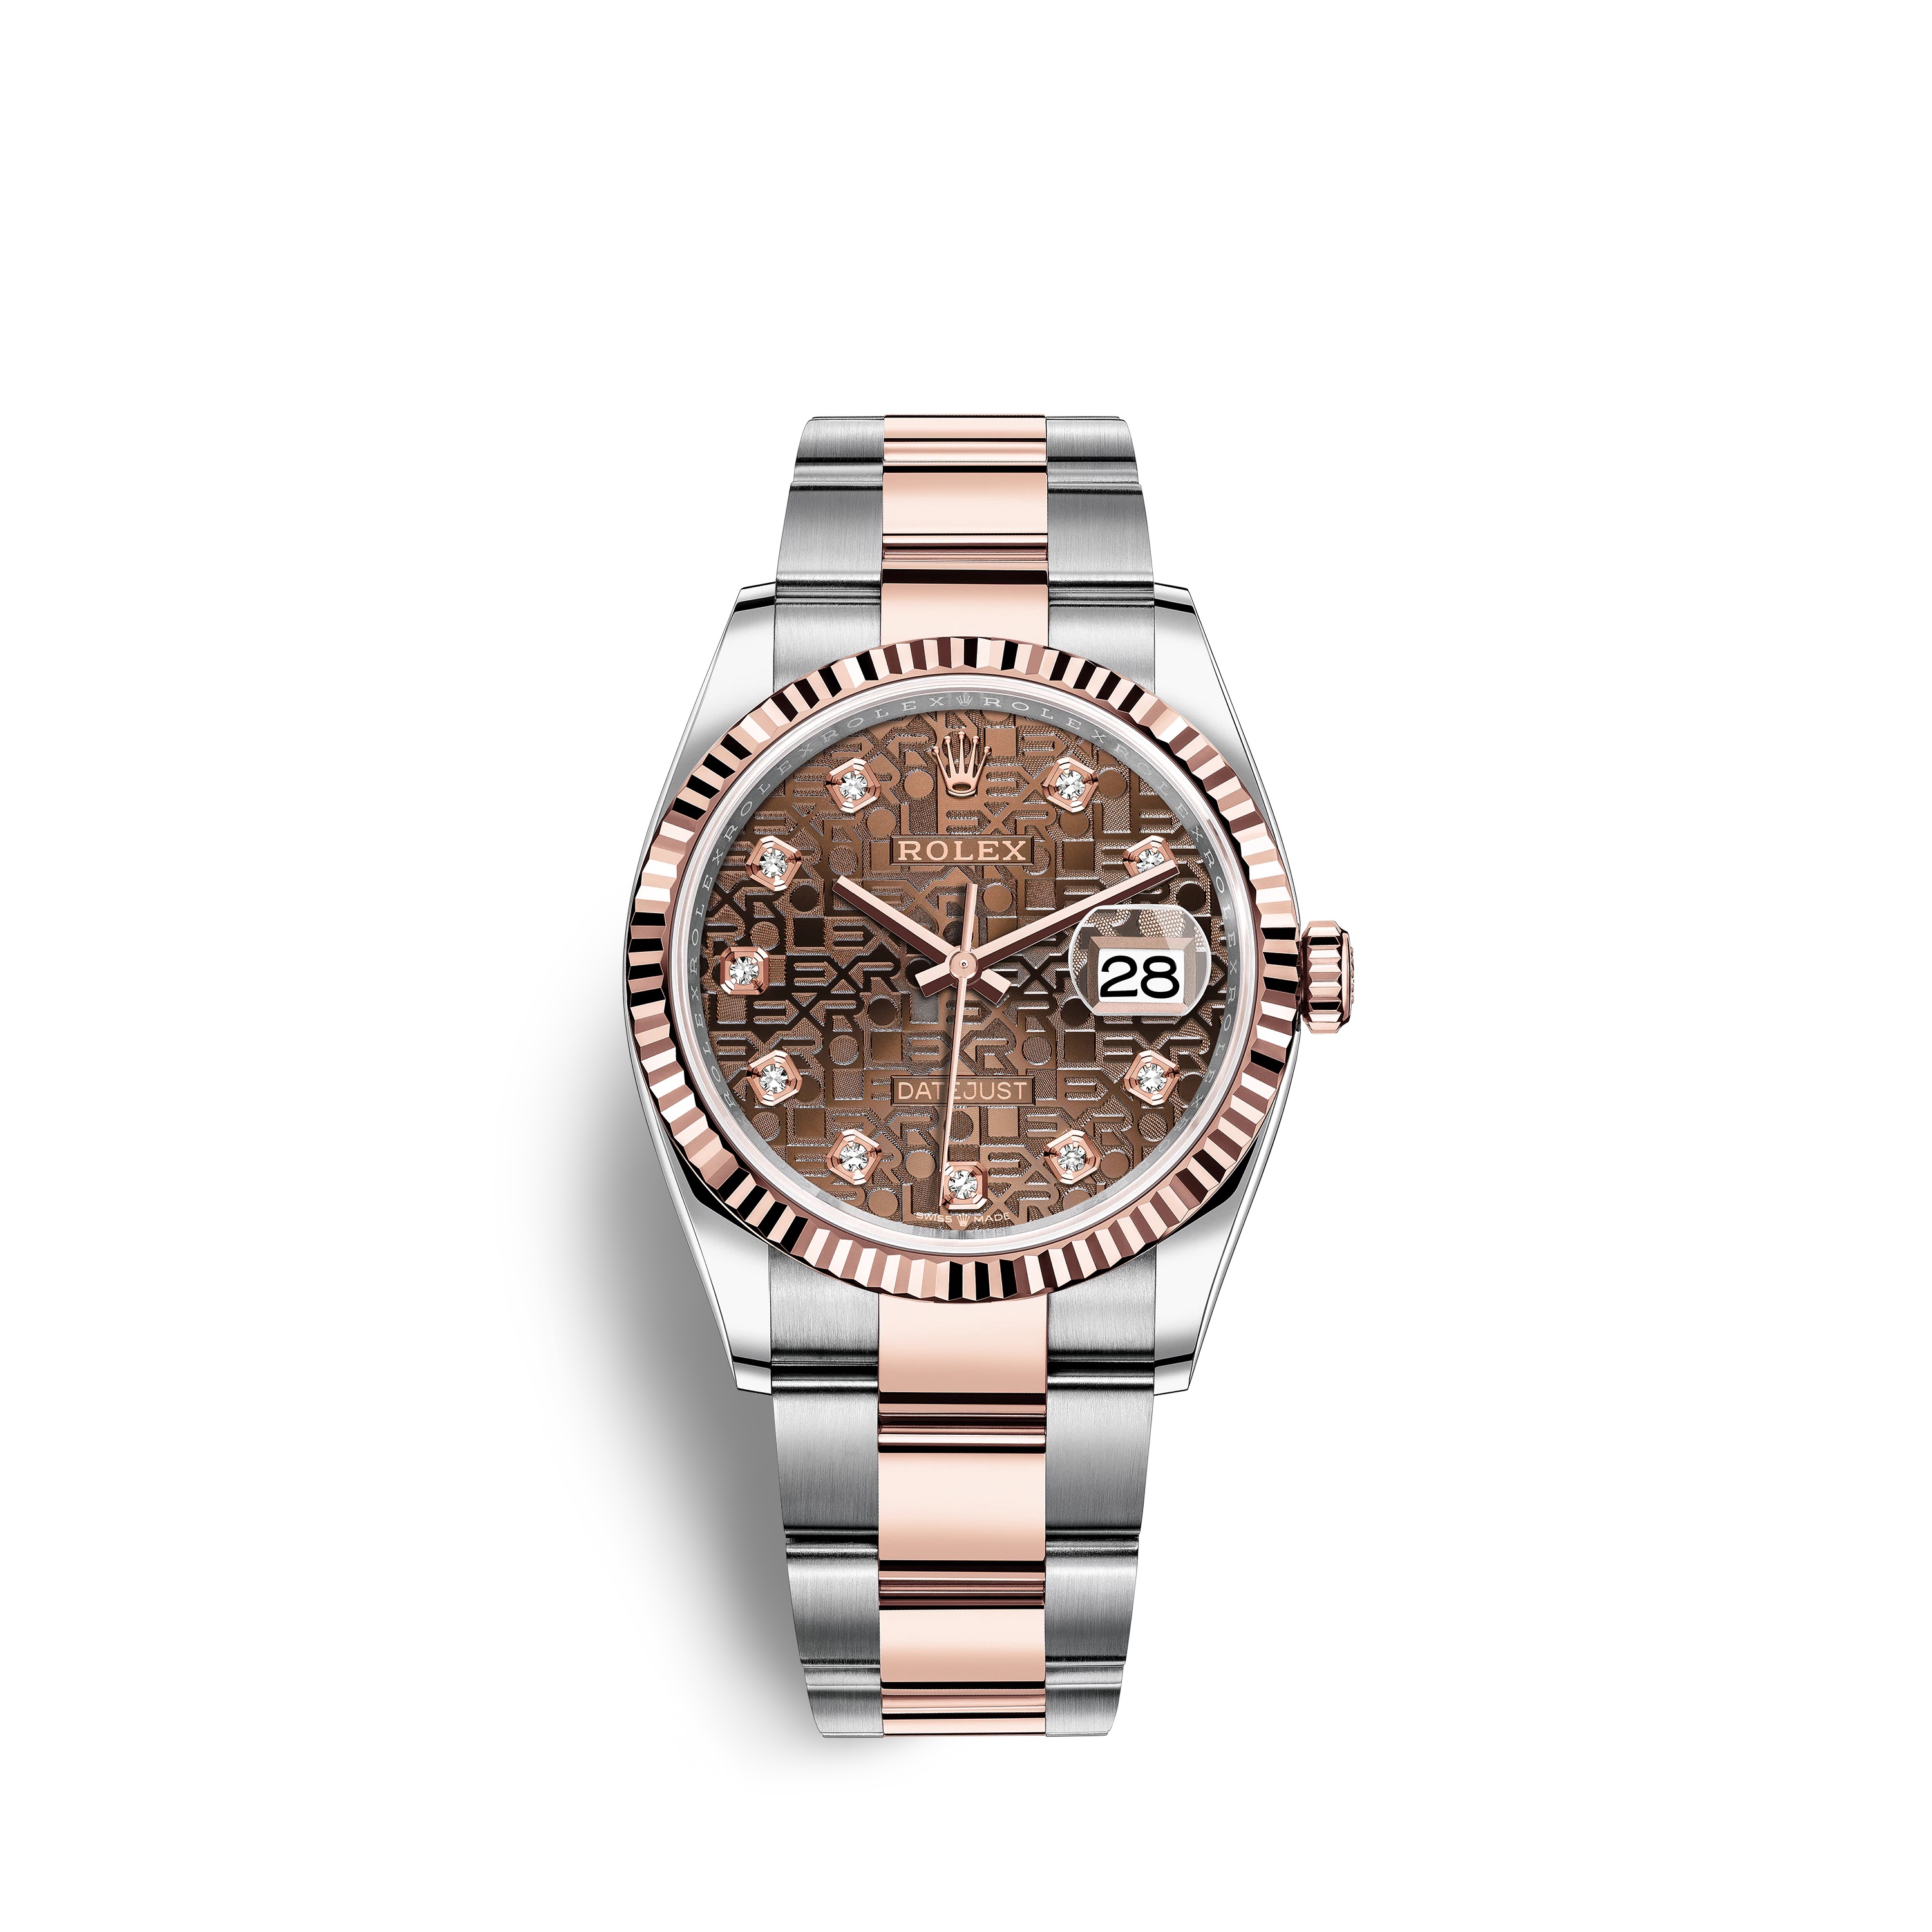 Datejust 36 126231 Rose Gold & Stainless Steel Watch (Chocolate Jubilee Design Set with Diamonds)